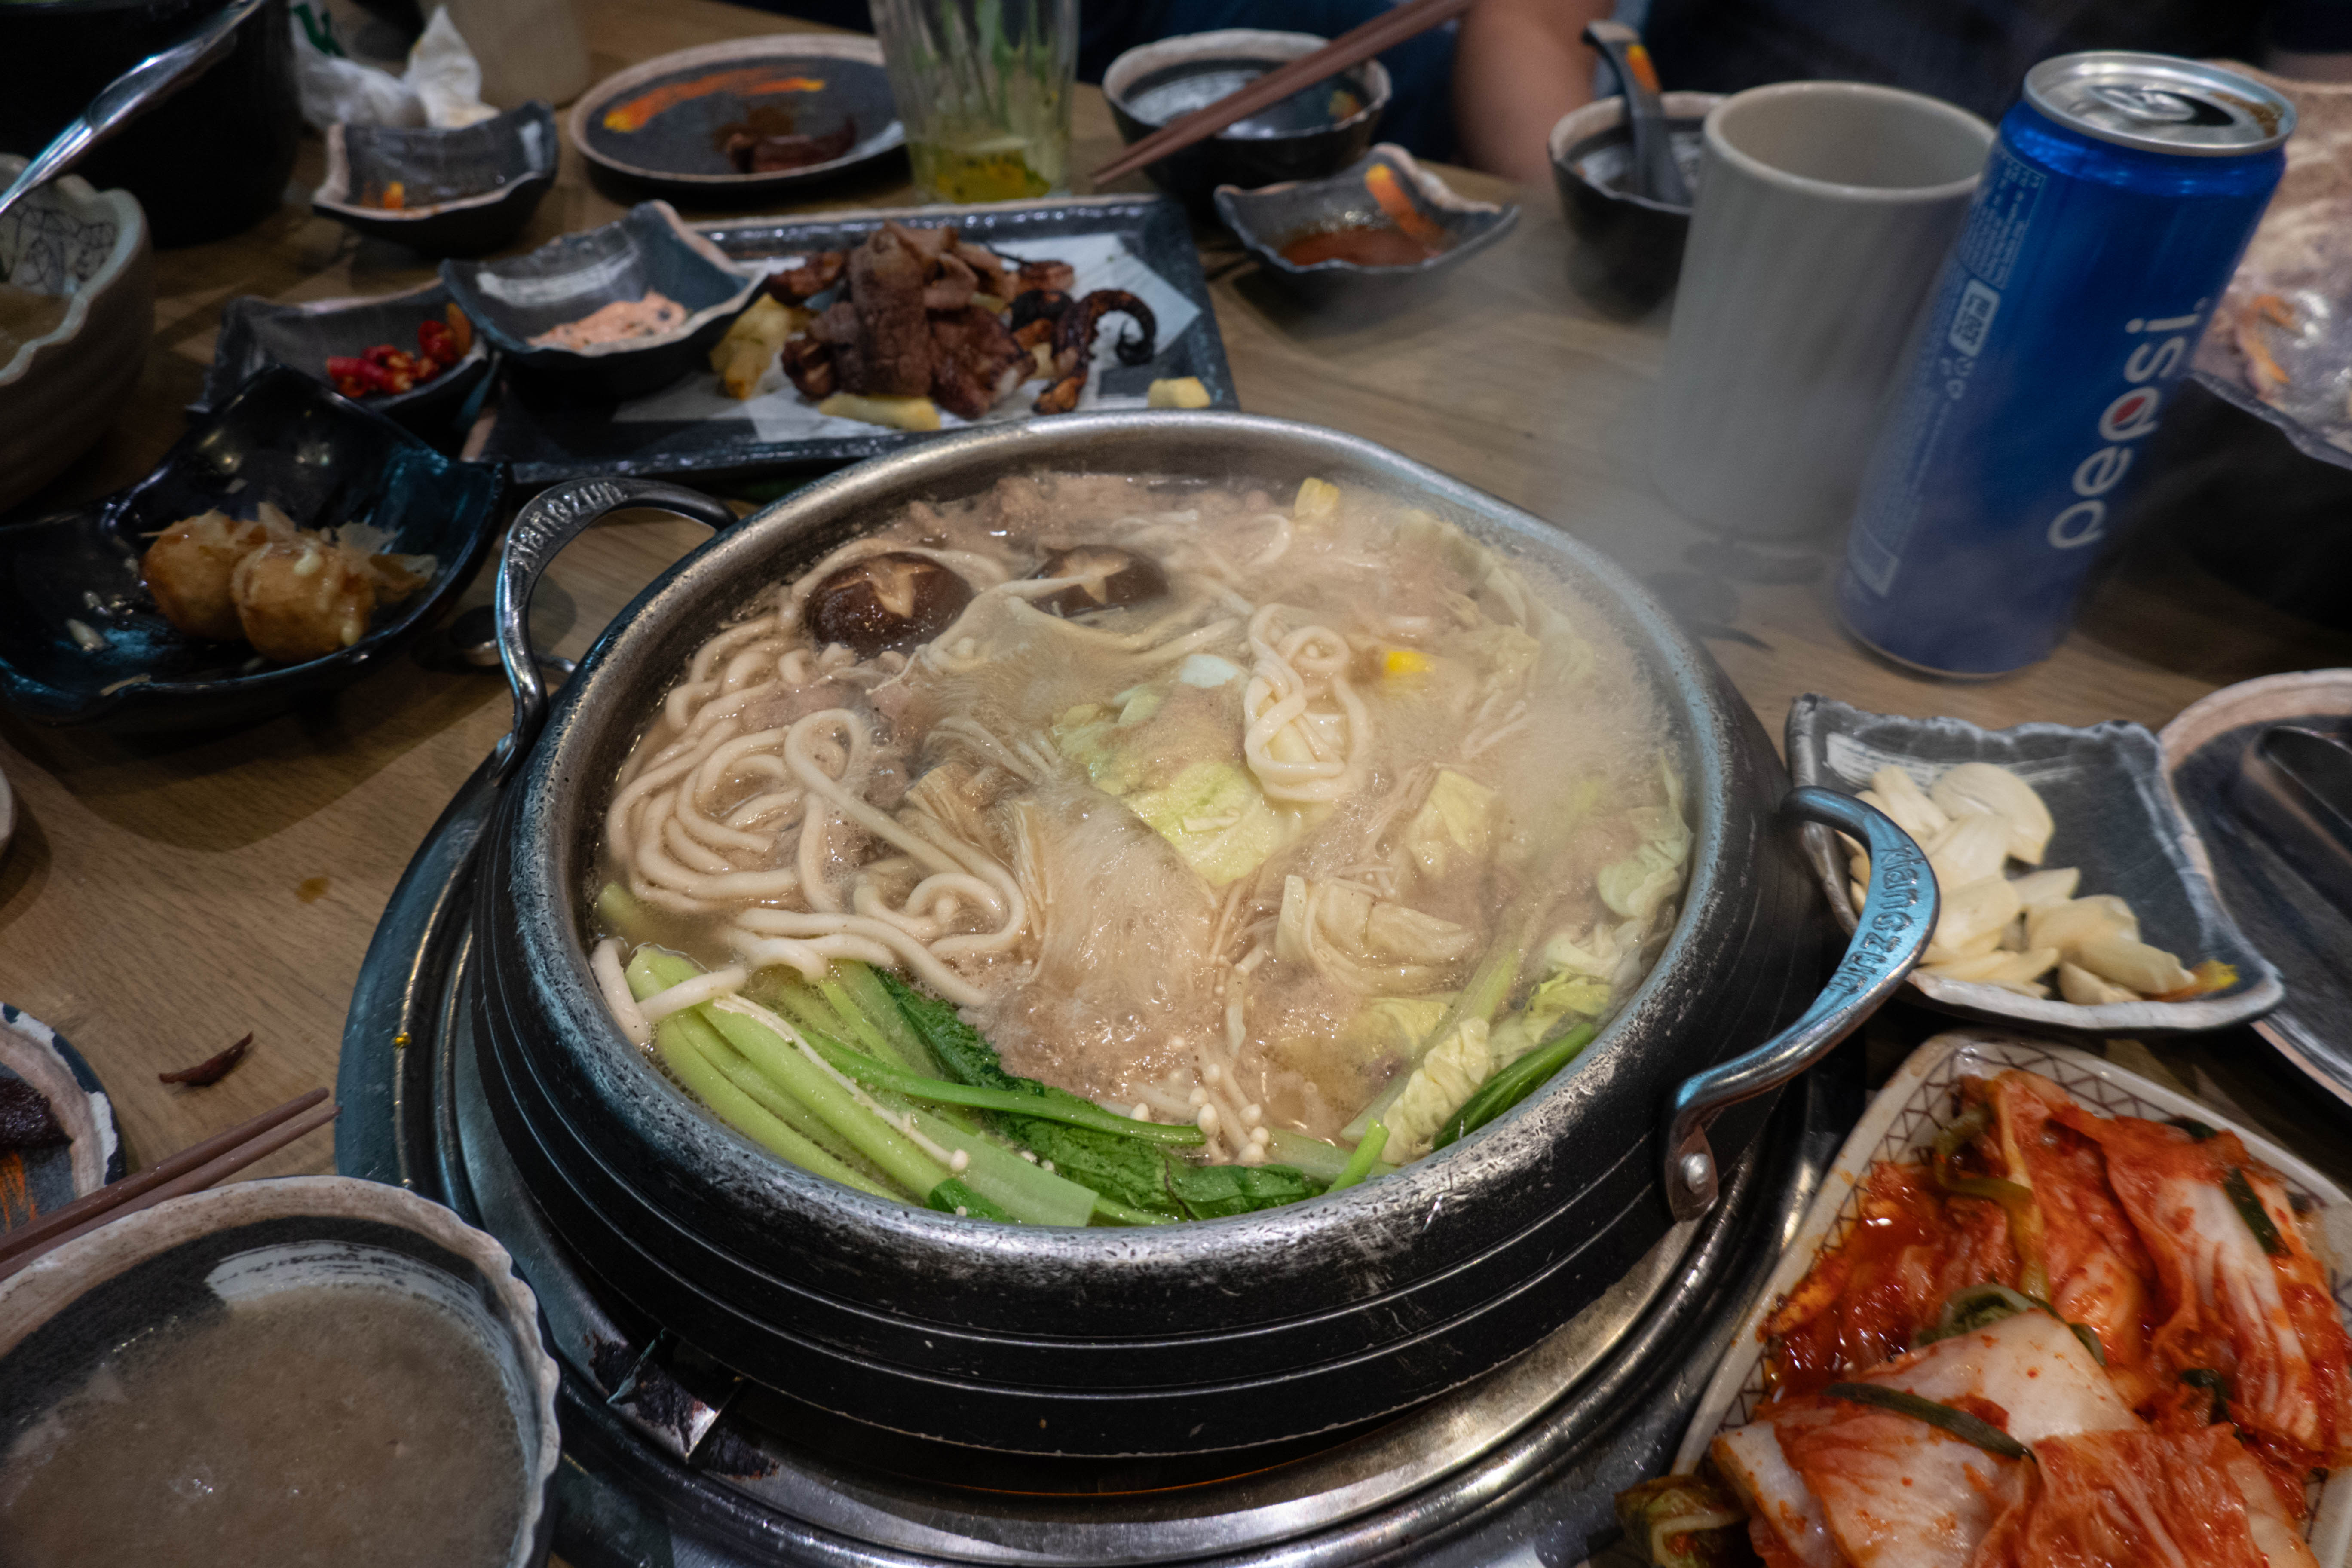 Picture of boiling hotpot with noodles, mushrooms, and greens